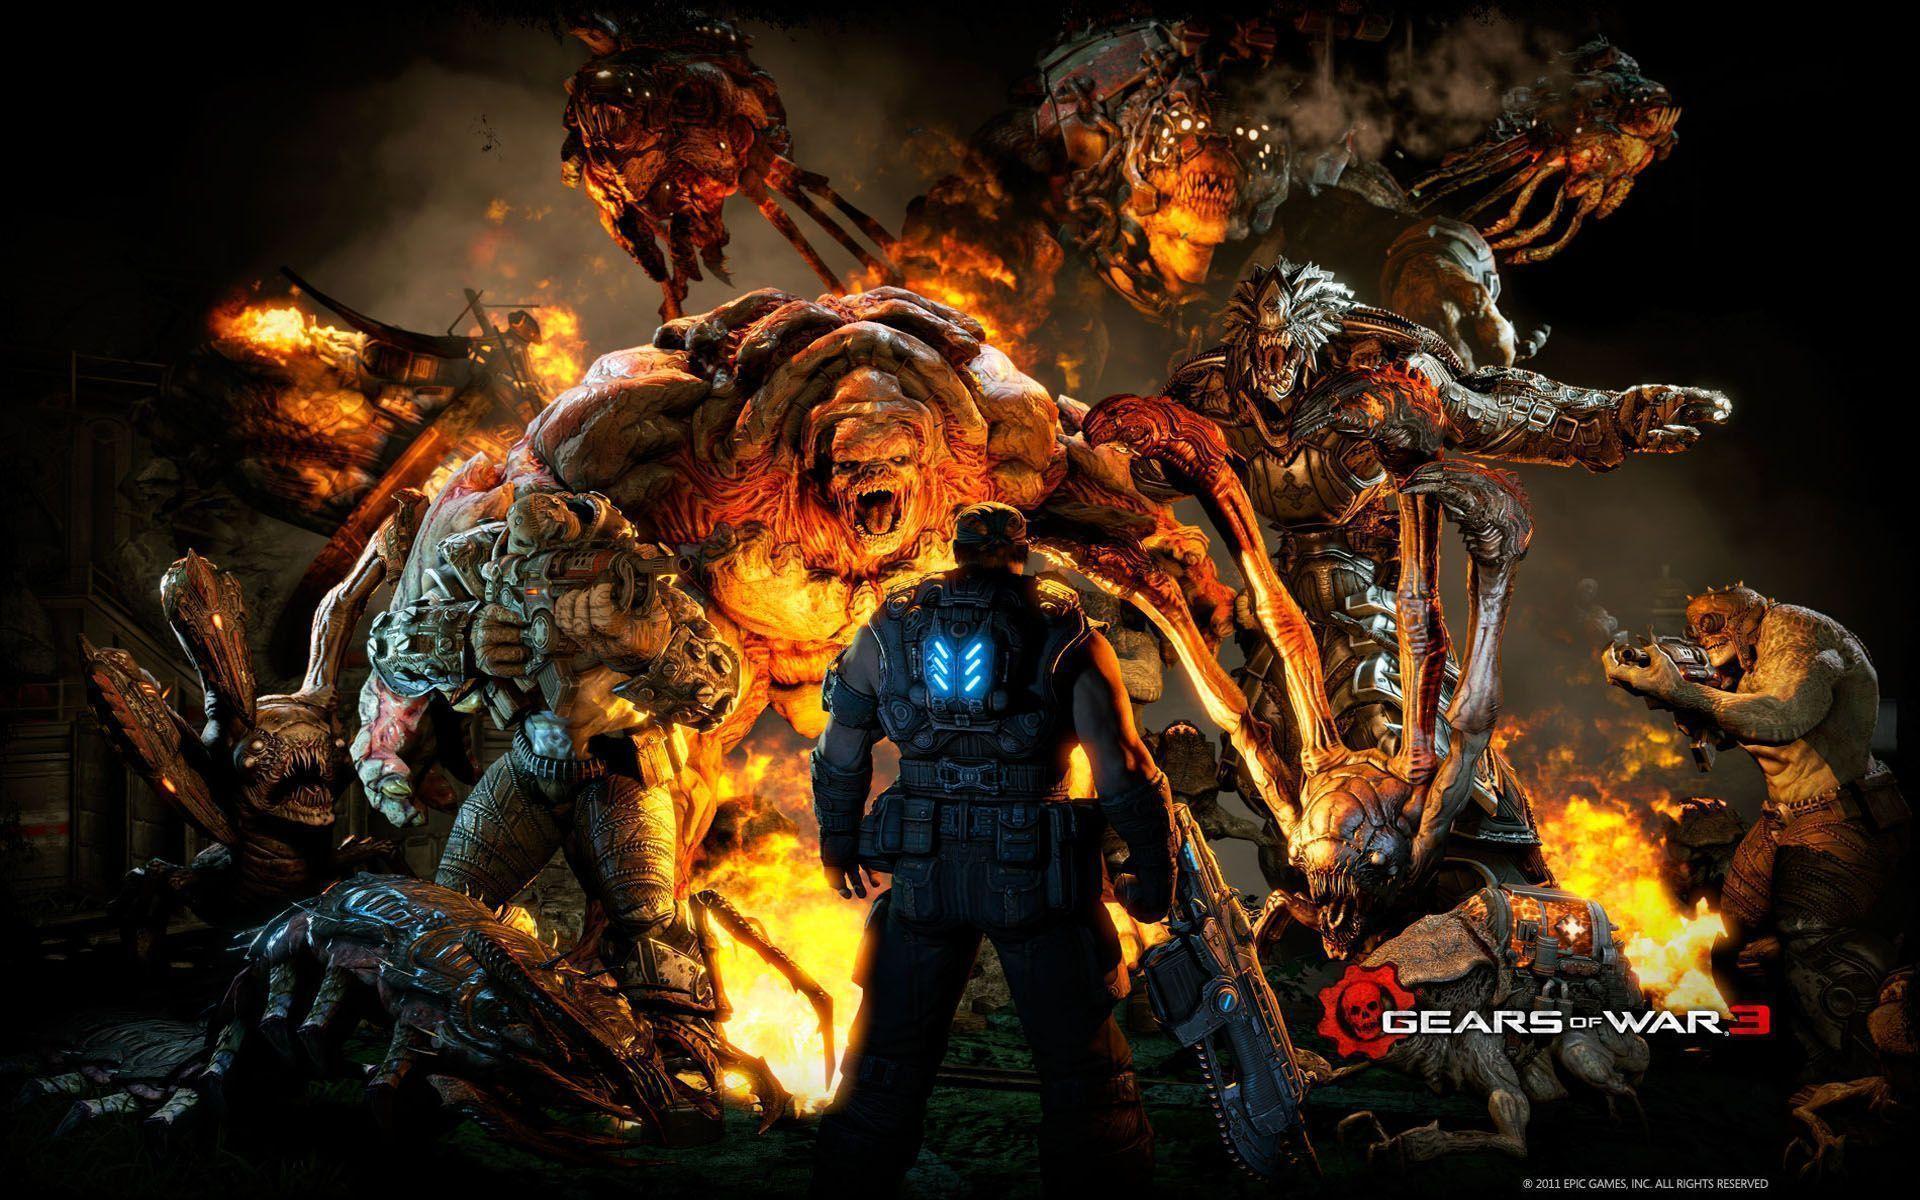 Gears of War Puzzles